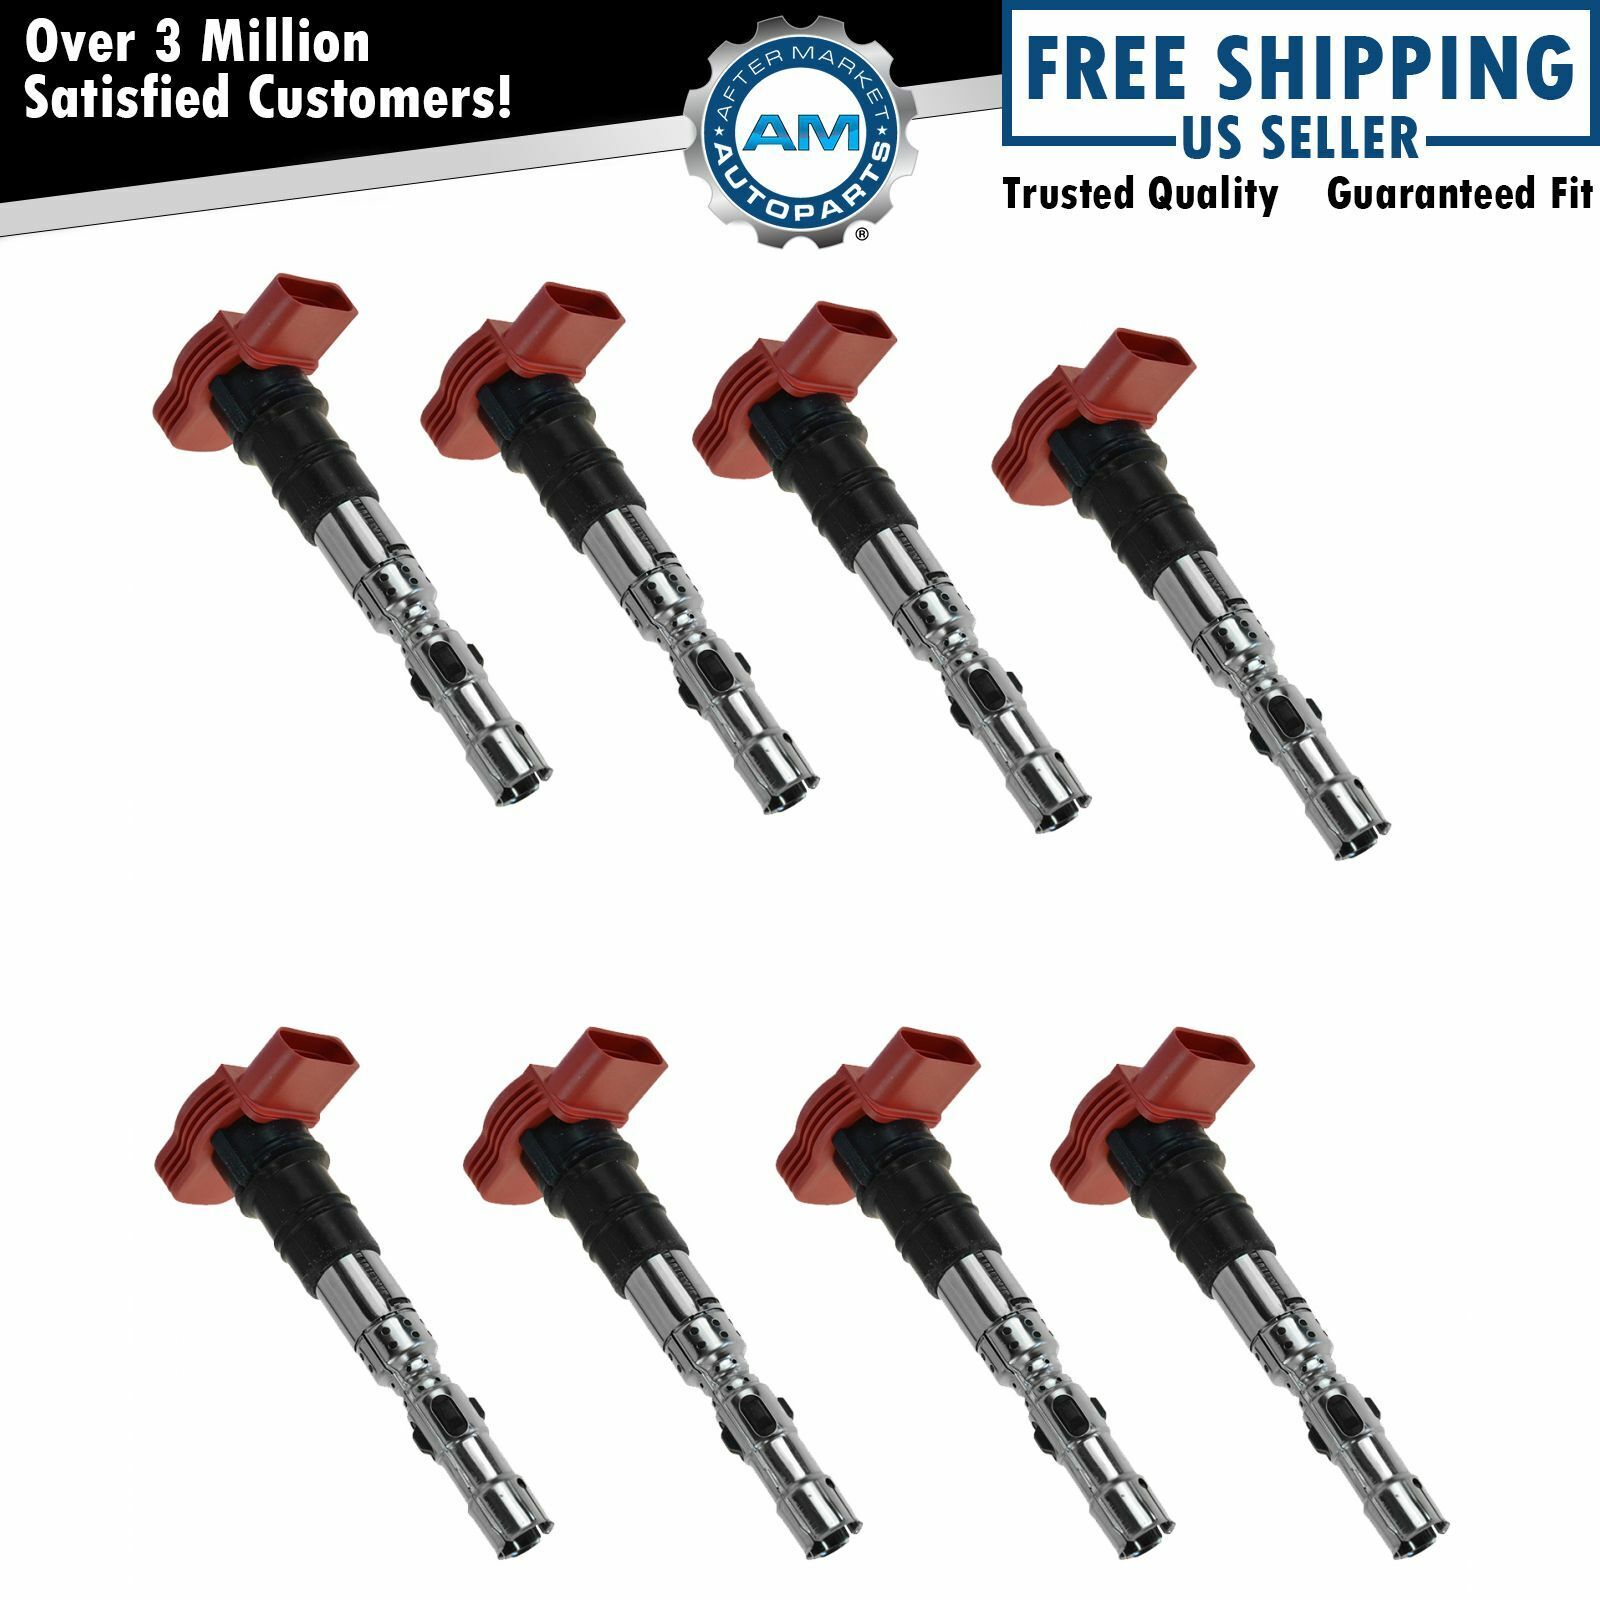 OEM 077-905-115-T Ignition Coil KIt Set of 8 for Audi S4 Allroad A6 A8 4.2L New